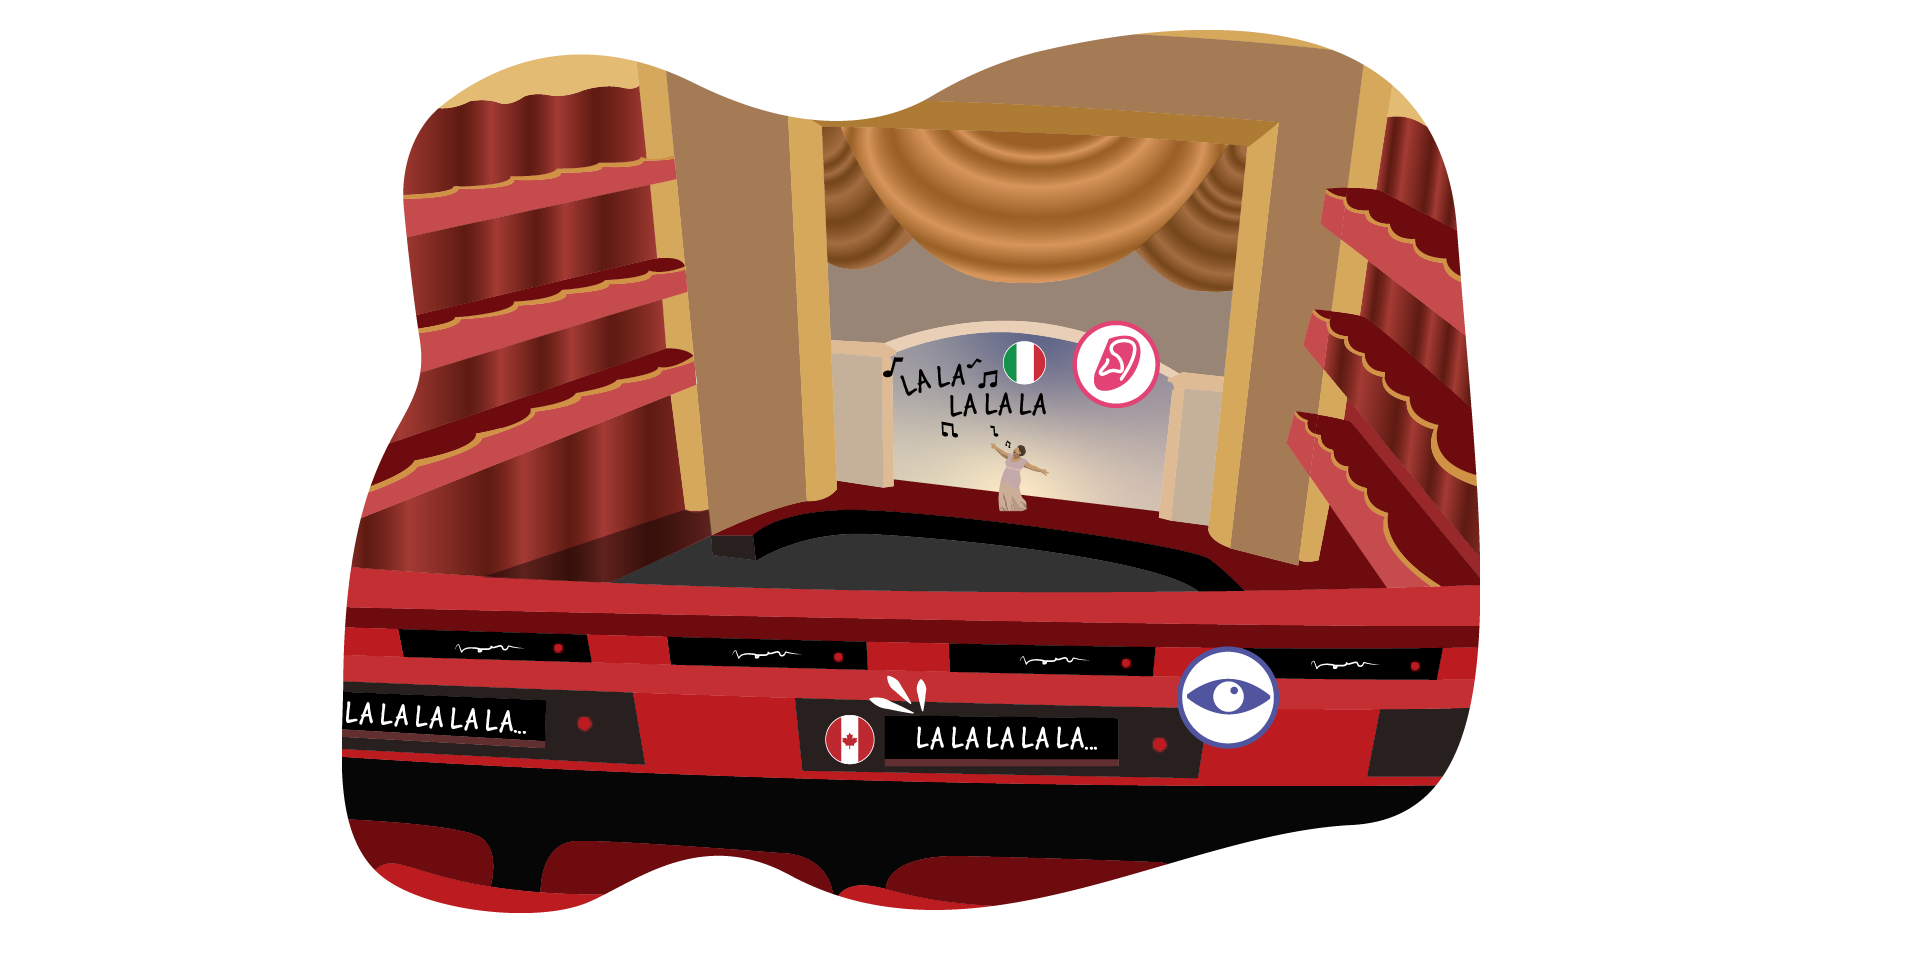 The view of a stage inside of a theatre with red curtains, seats, and railings. On stage is a person in a white dress singing with the text LA LA LA and black musical notes. An Italian flag with a circle with an ear icon is placed next to the text, showing that the person is singing in Italian. Behind the railing is a black screen with a Canadian flag and a written translation of what the person is singing. A circle with an eye icon is placed beside the screen.